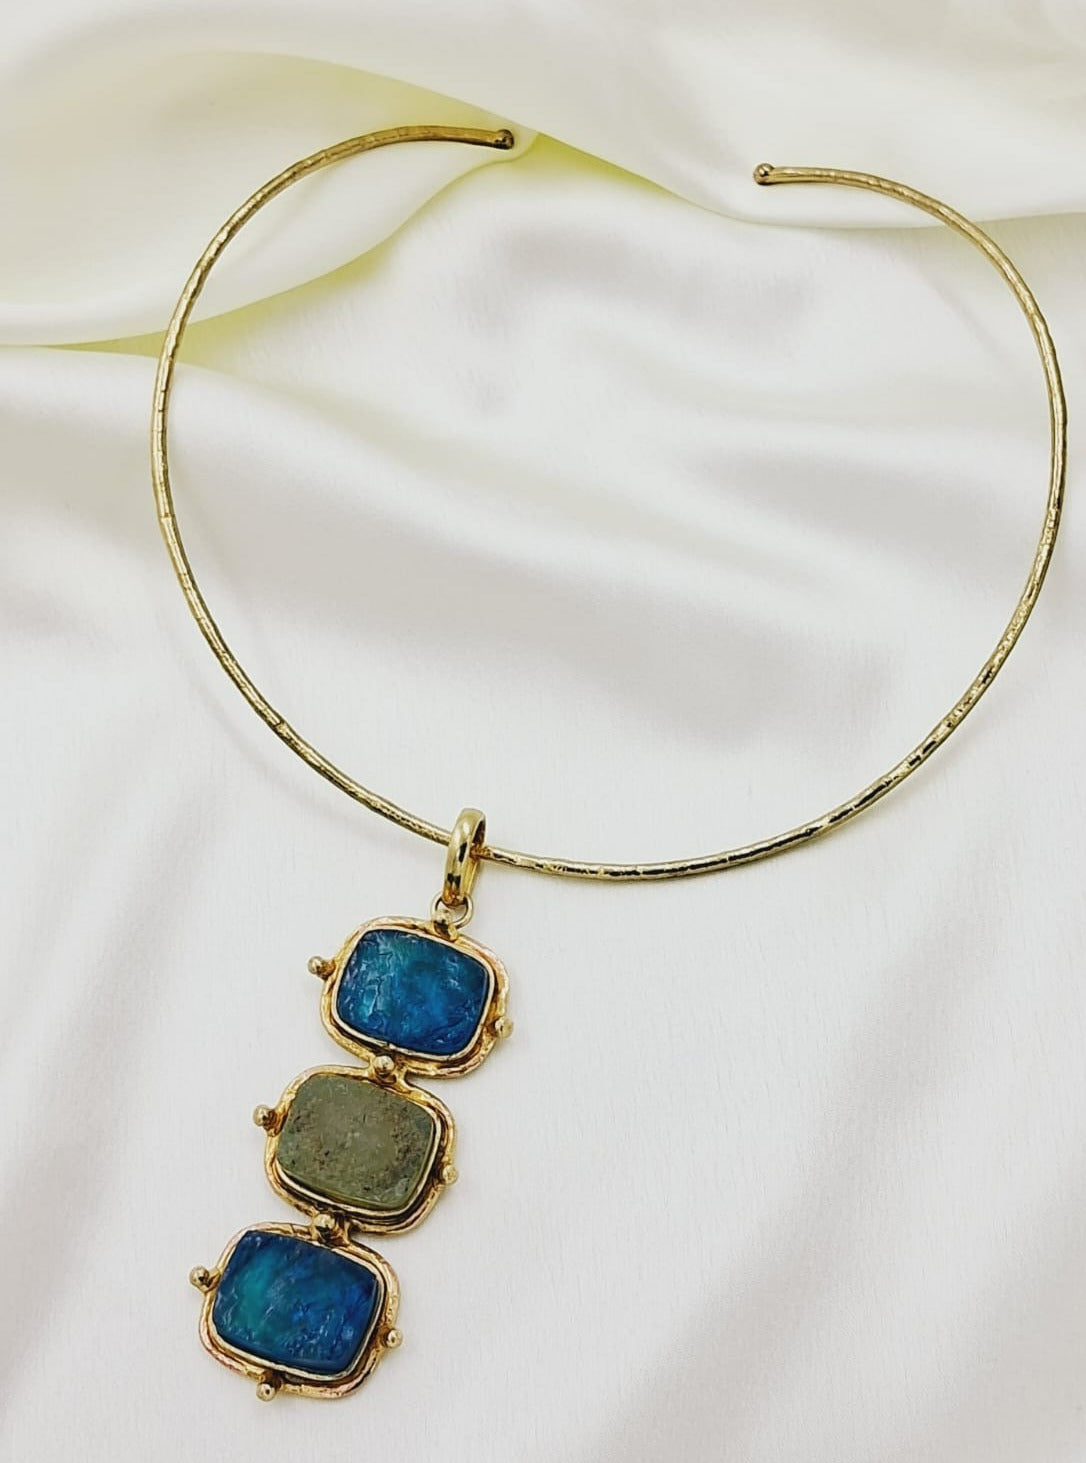 This necklace is made by rough blue three square look alikse semi precious stone hanging by gold plated adjustable hasli.